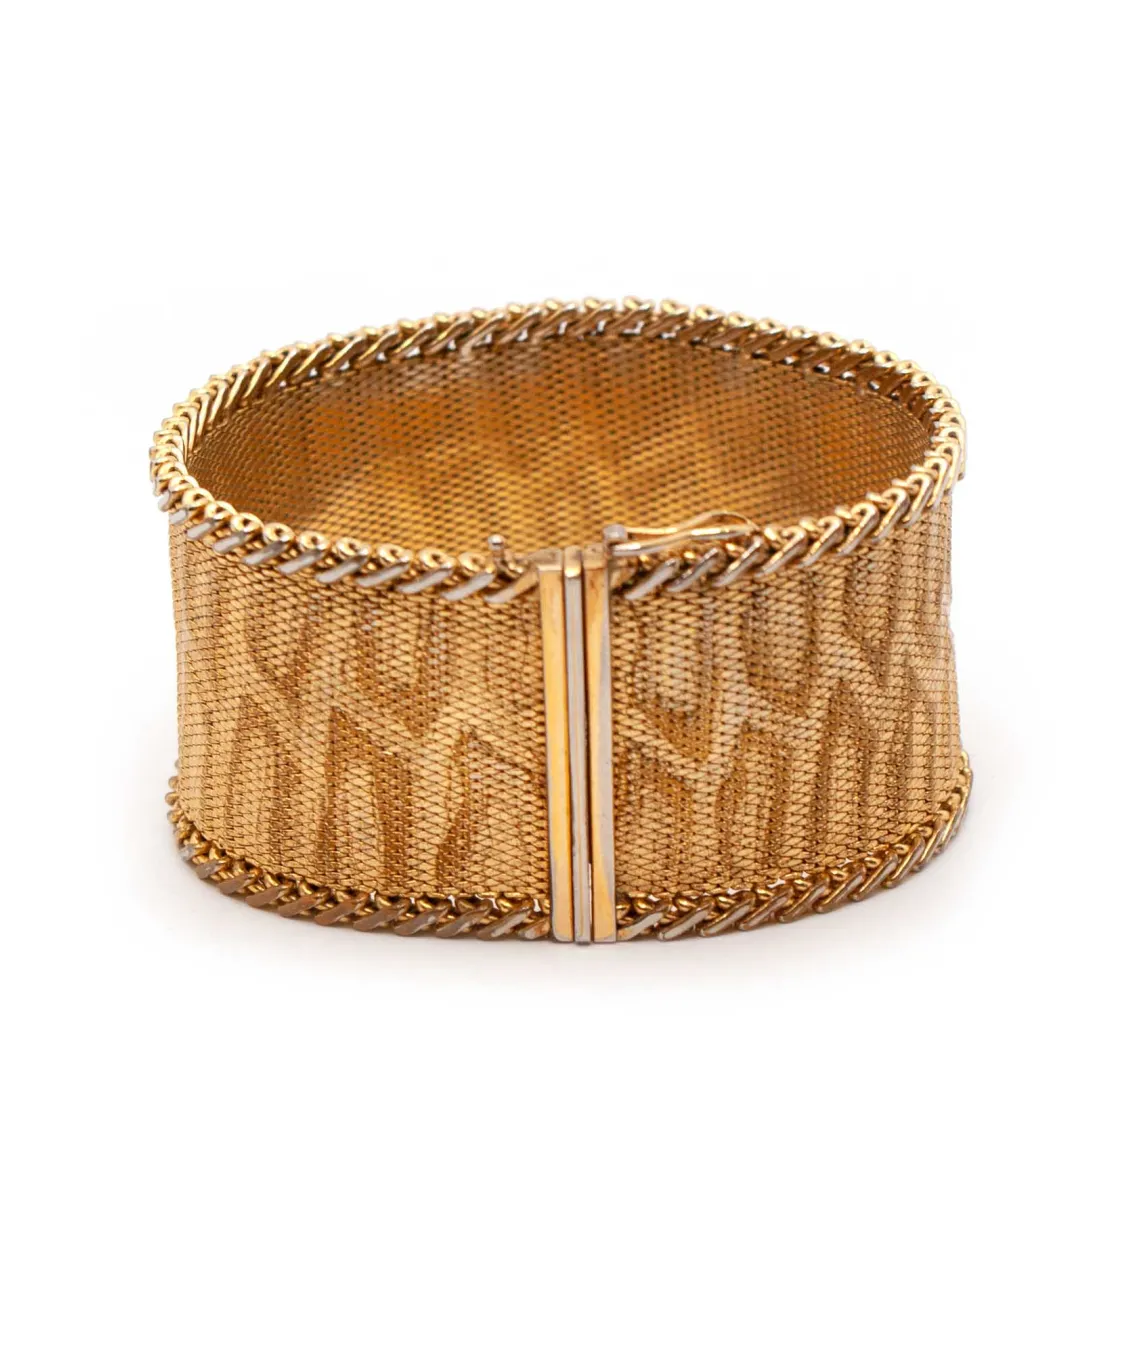 Gold tone woven bracelet by Grosse done up with clasp facing forward